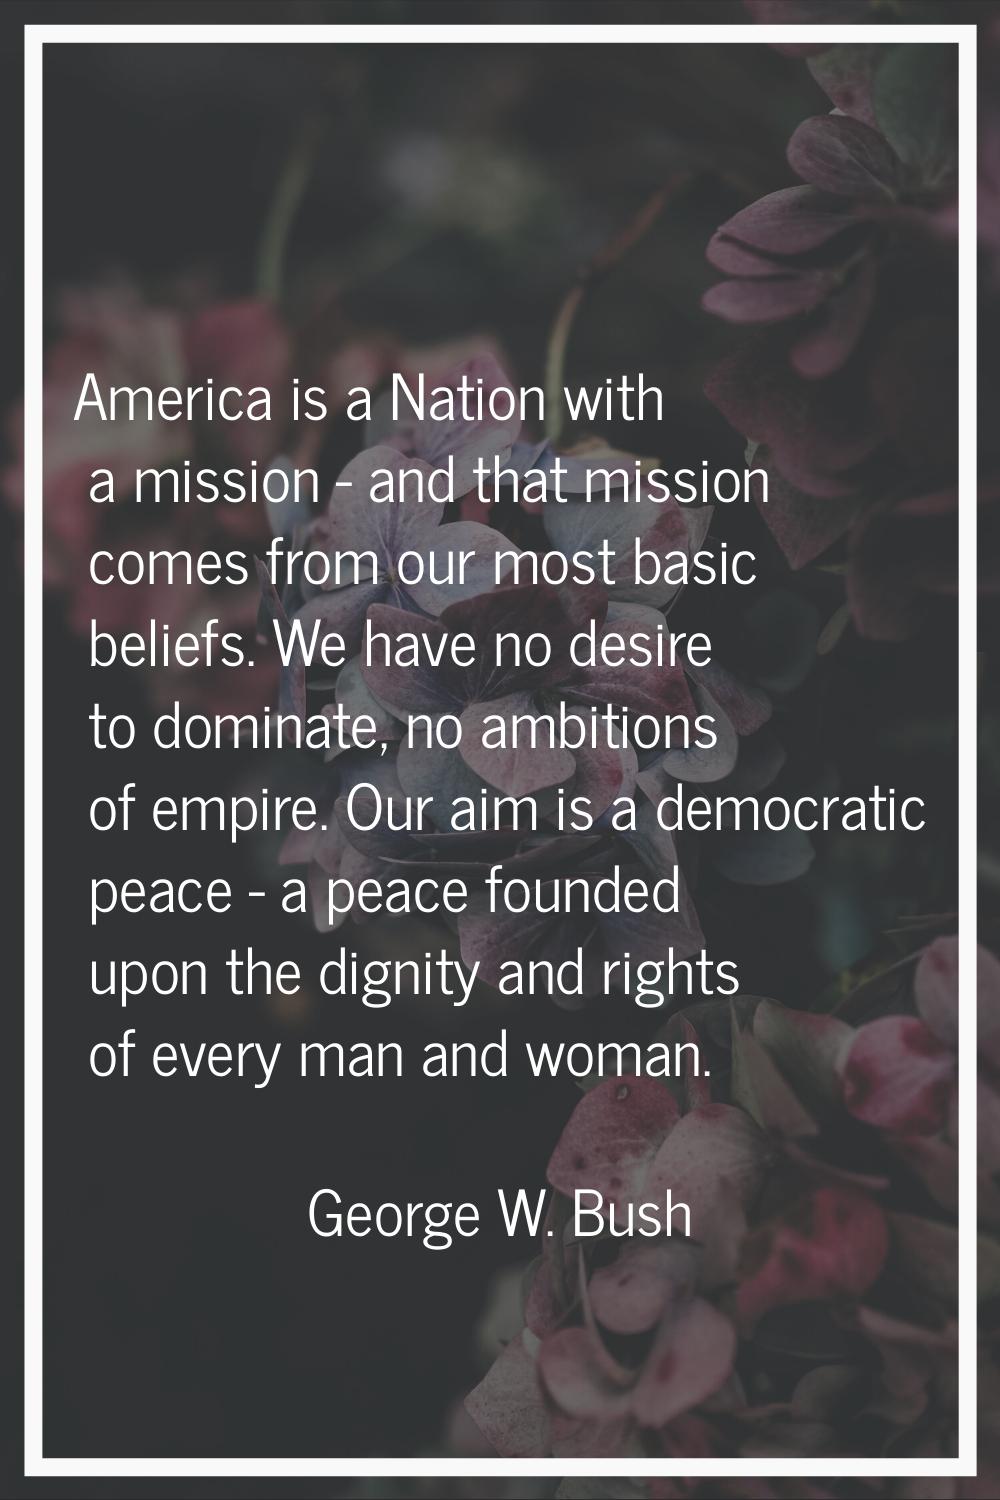 America is a Nation with a mission - and that mission comes from our most basic beliefs. We have no